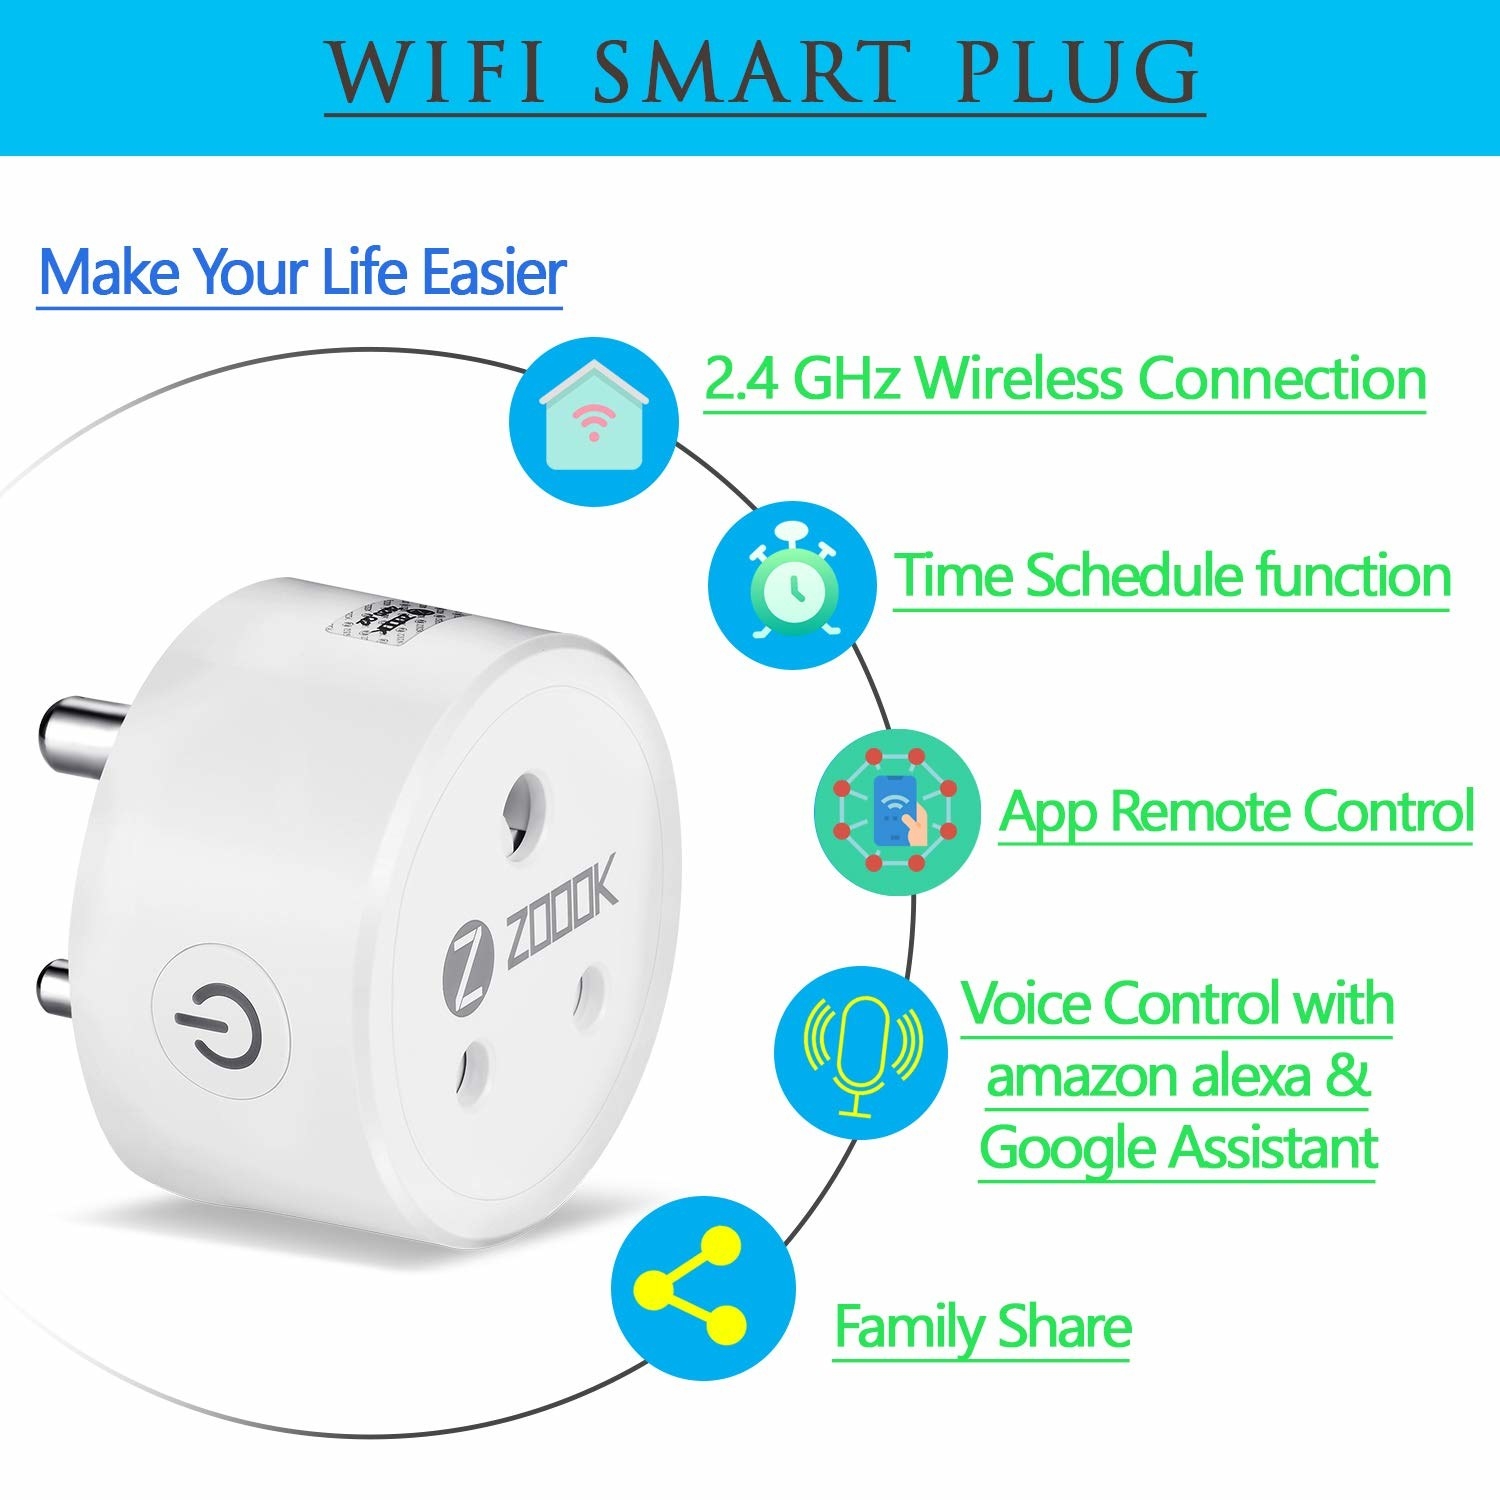 A Zoook smart plug in white, with various listed features such as &quot;Time Schedule Function&quot; and &quot;Voice Control with Amazon Alexa and Google Assistant&quot;